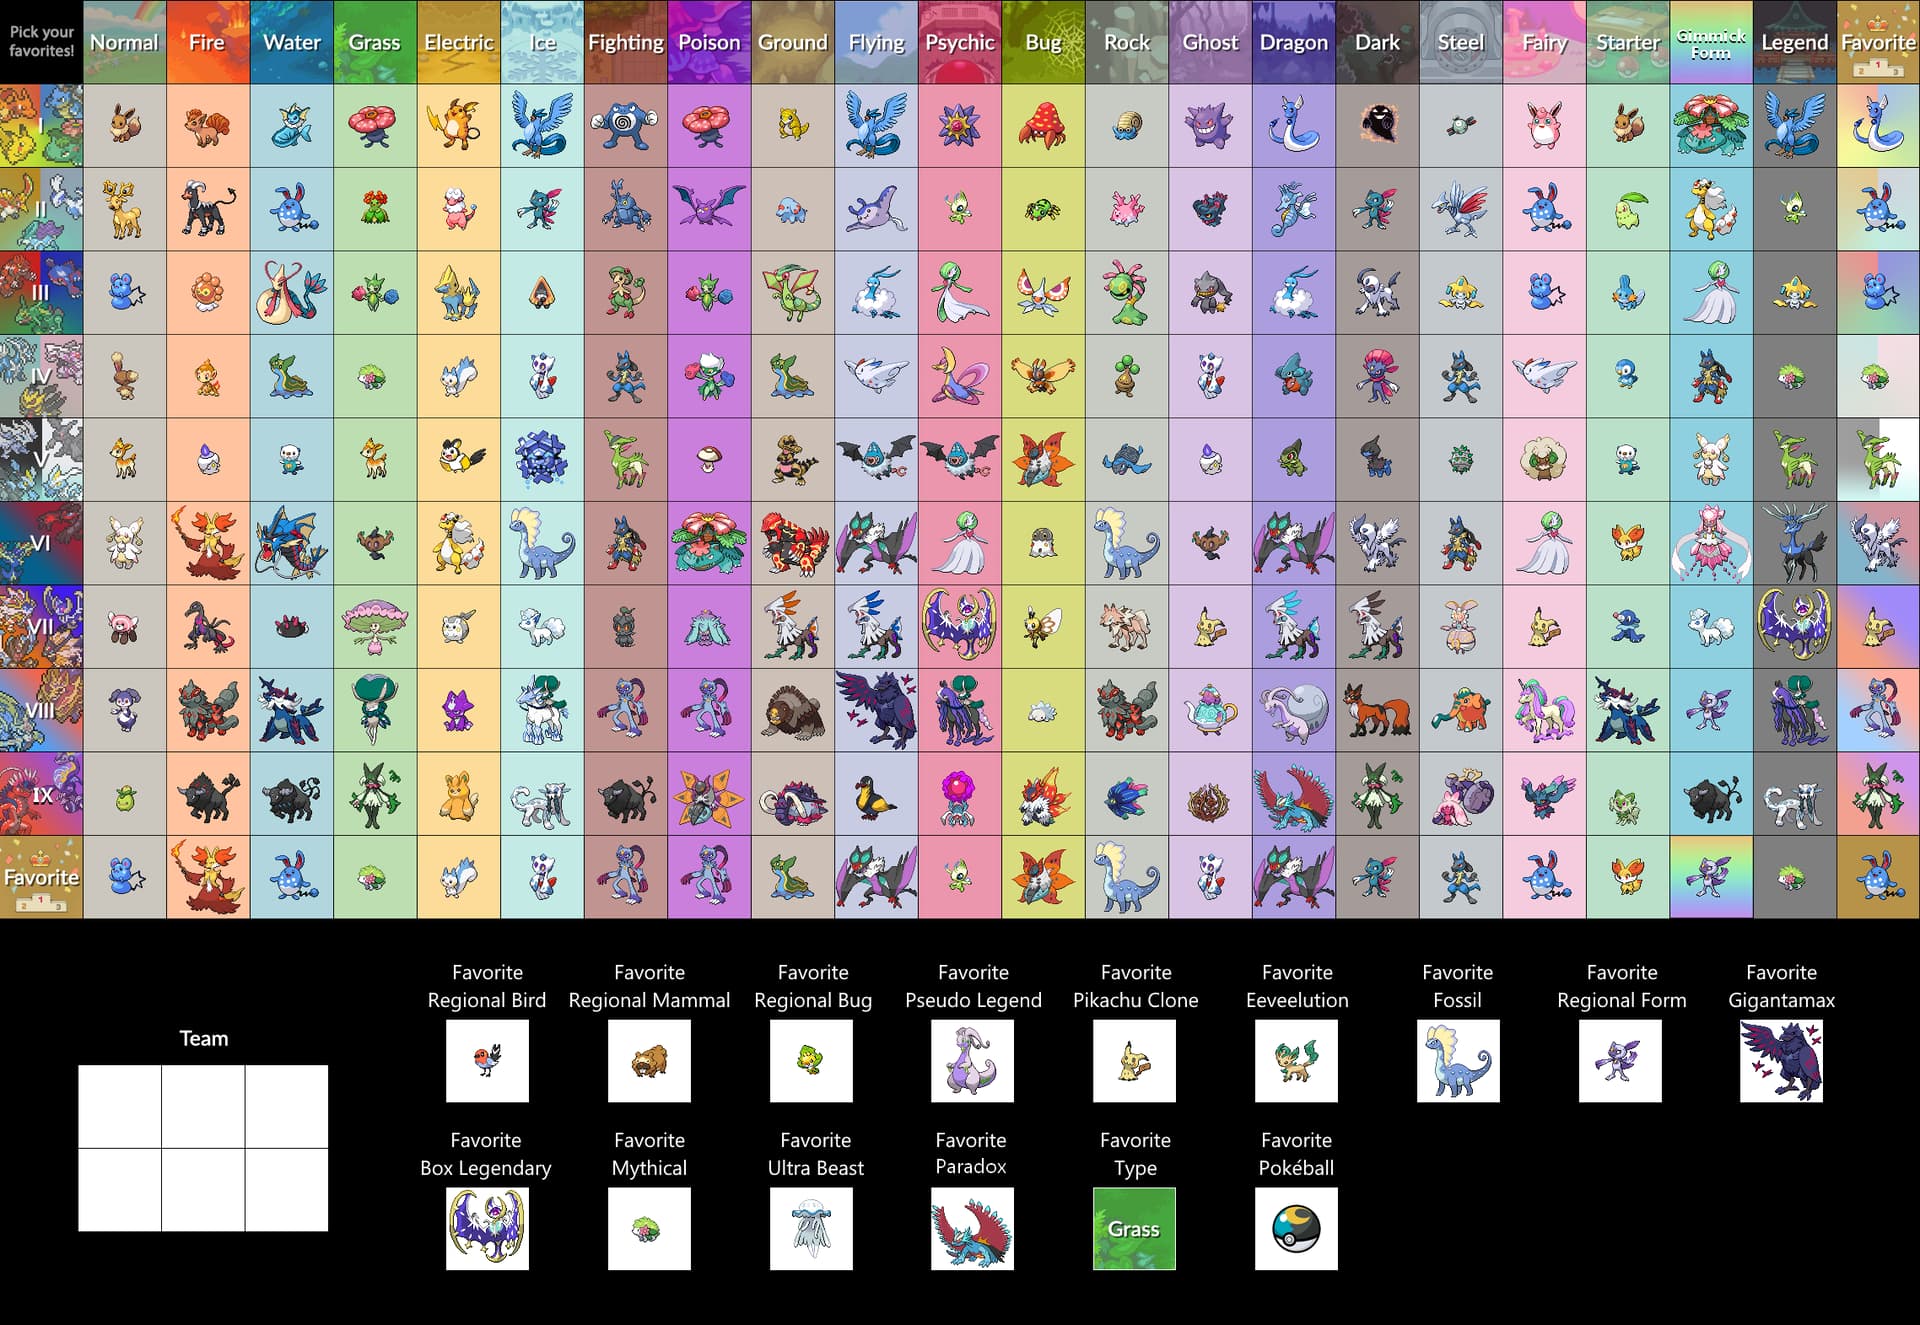 The best Pokemon of each type (You don't get an opinion, this is